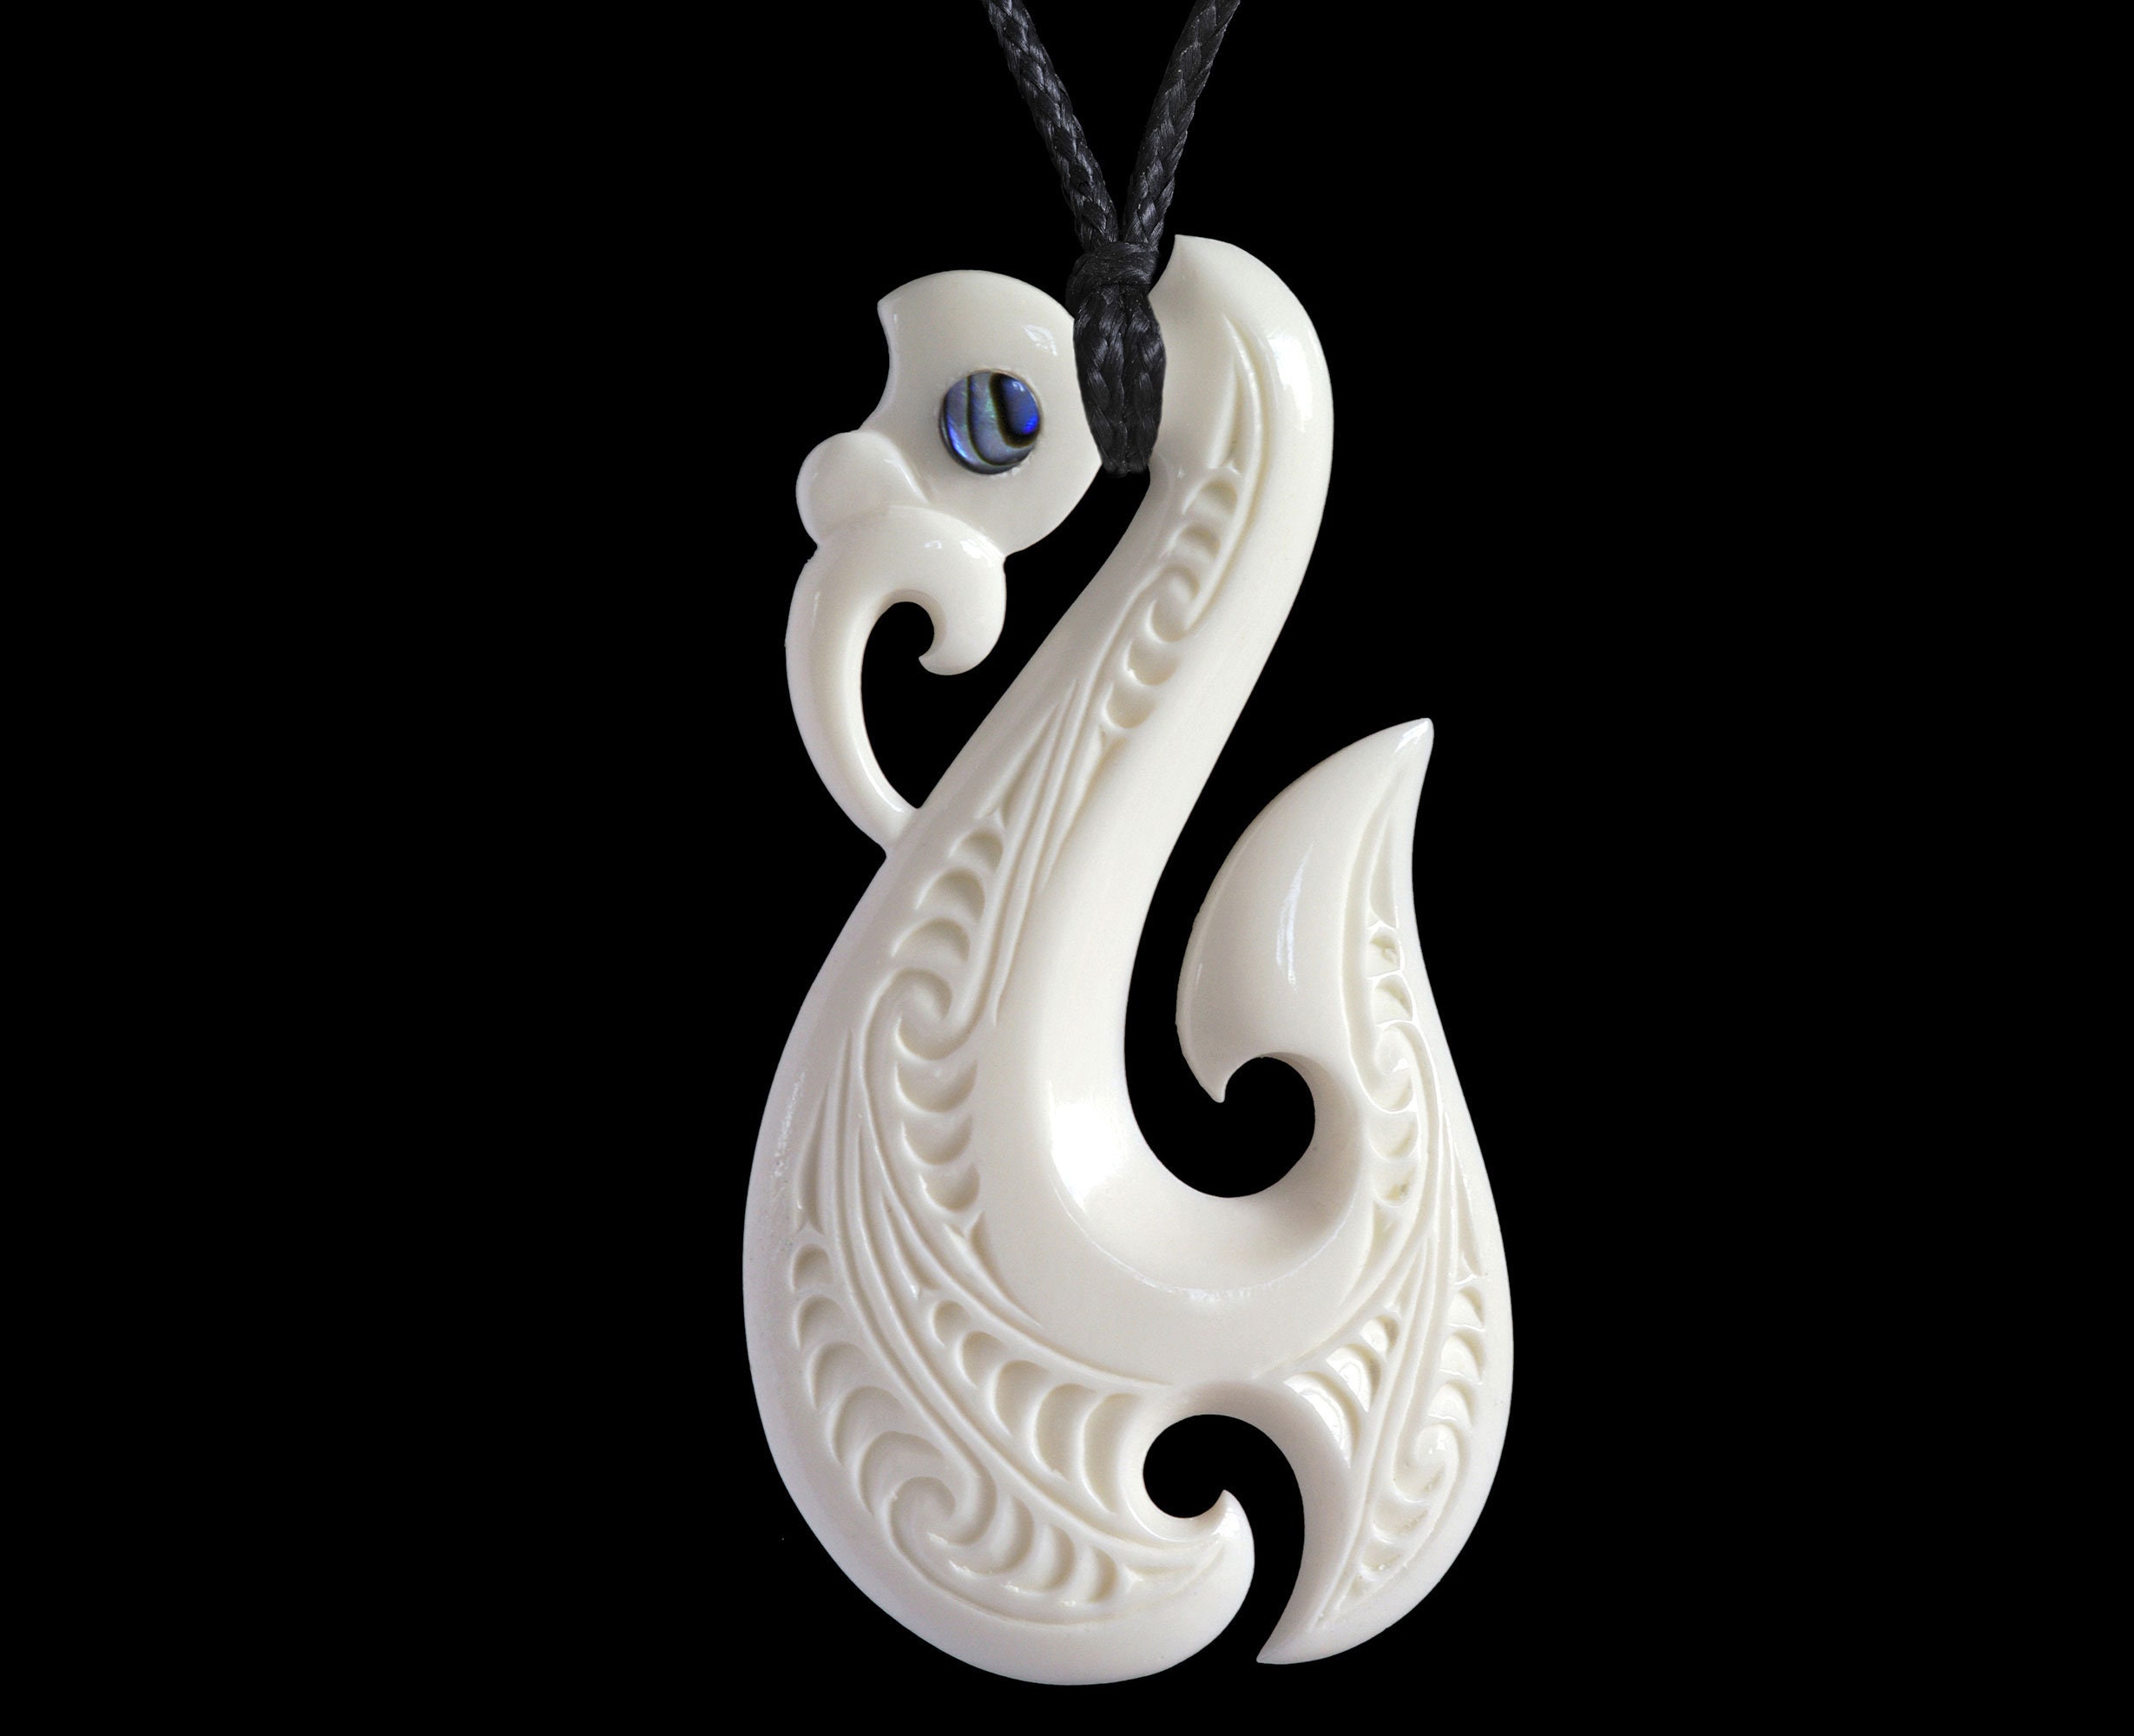 Hei Matau / Twist necklace bone Carving Jewelry New Zealand Hand Carved For  girl - Shop XKCHIEF- Handmade Jewelry Necklaces - Pinkoi